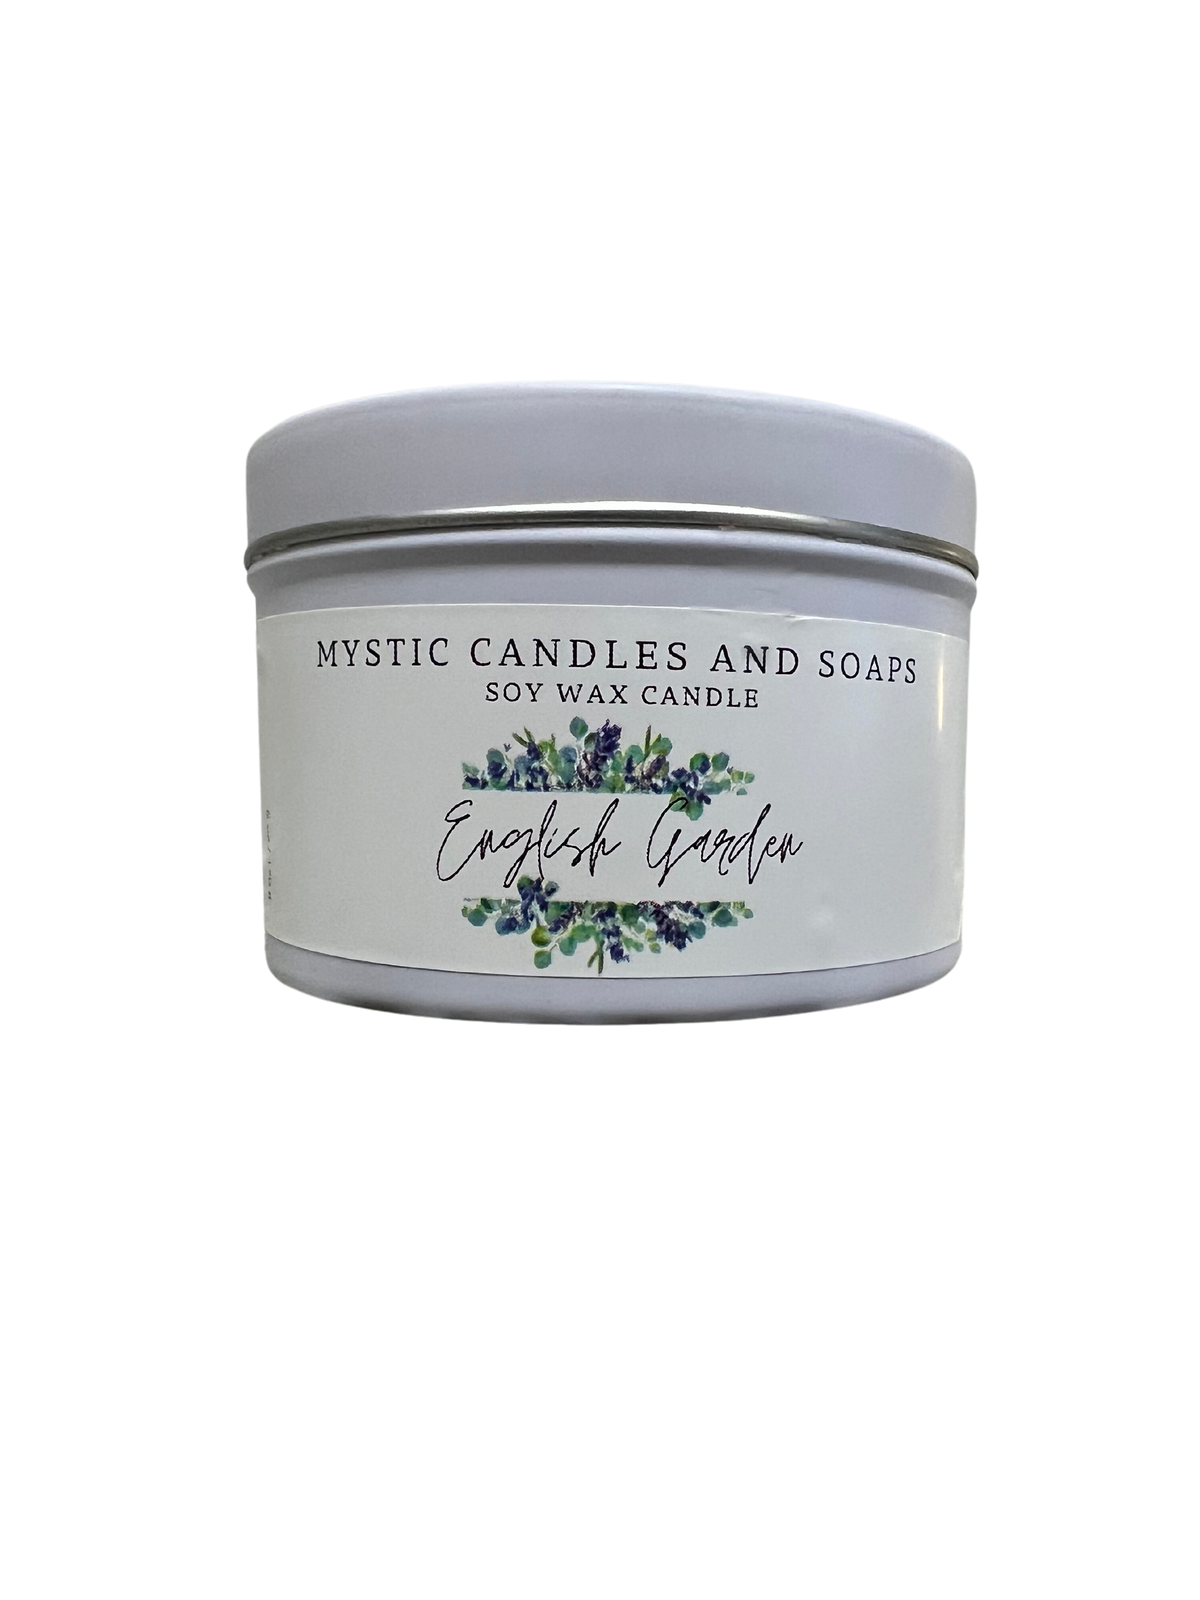 English Garden Flameless Candle - Mystic Candles and Soaps LLC